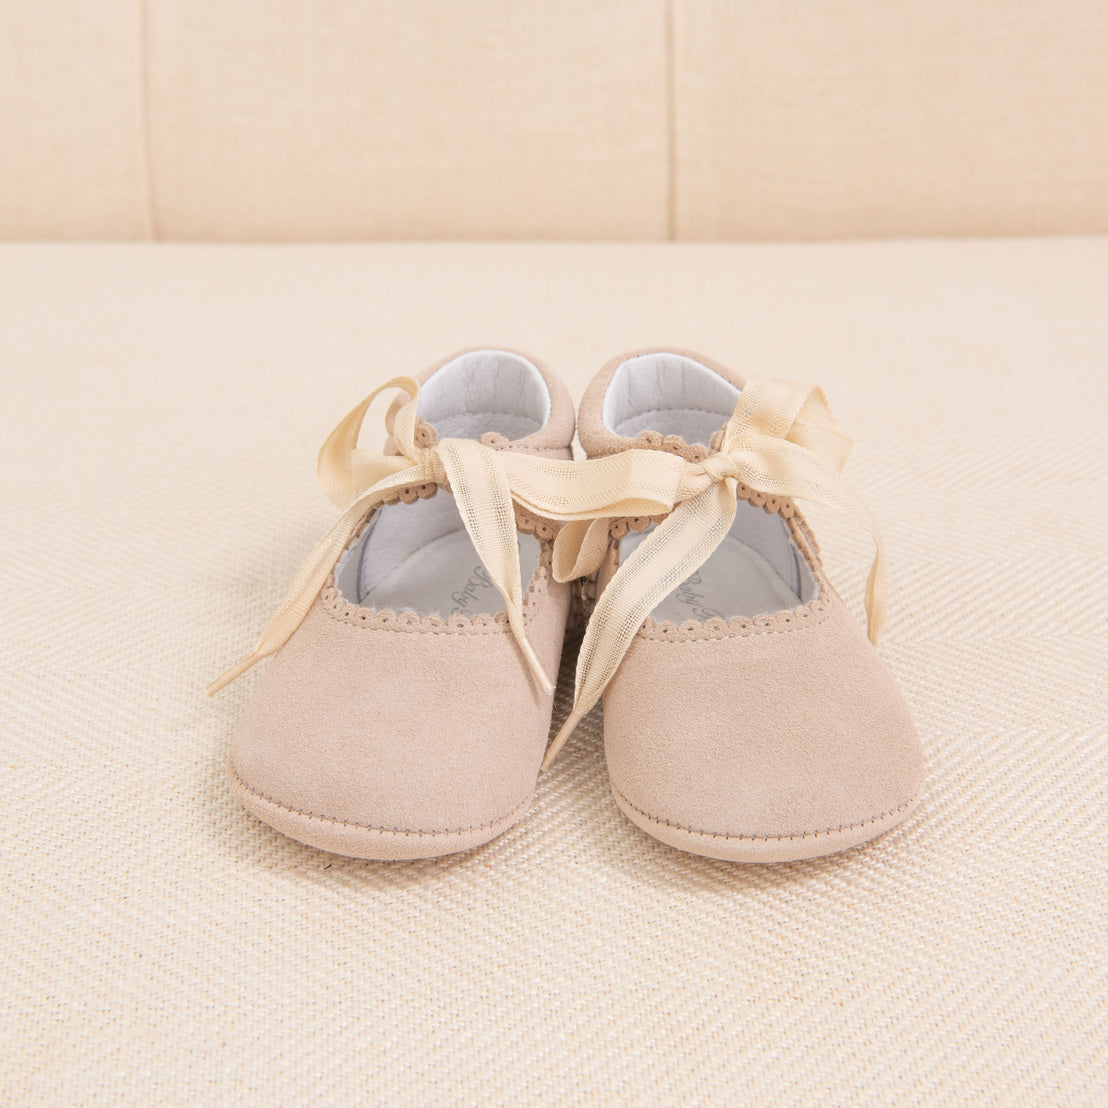 A pair of Girls Suede Tie Mary Janes in soft beige with delicate ribbon ties and scalloped edges, placed on a textured beige sofa.